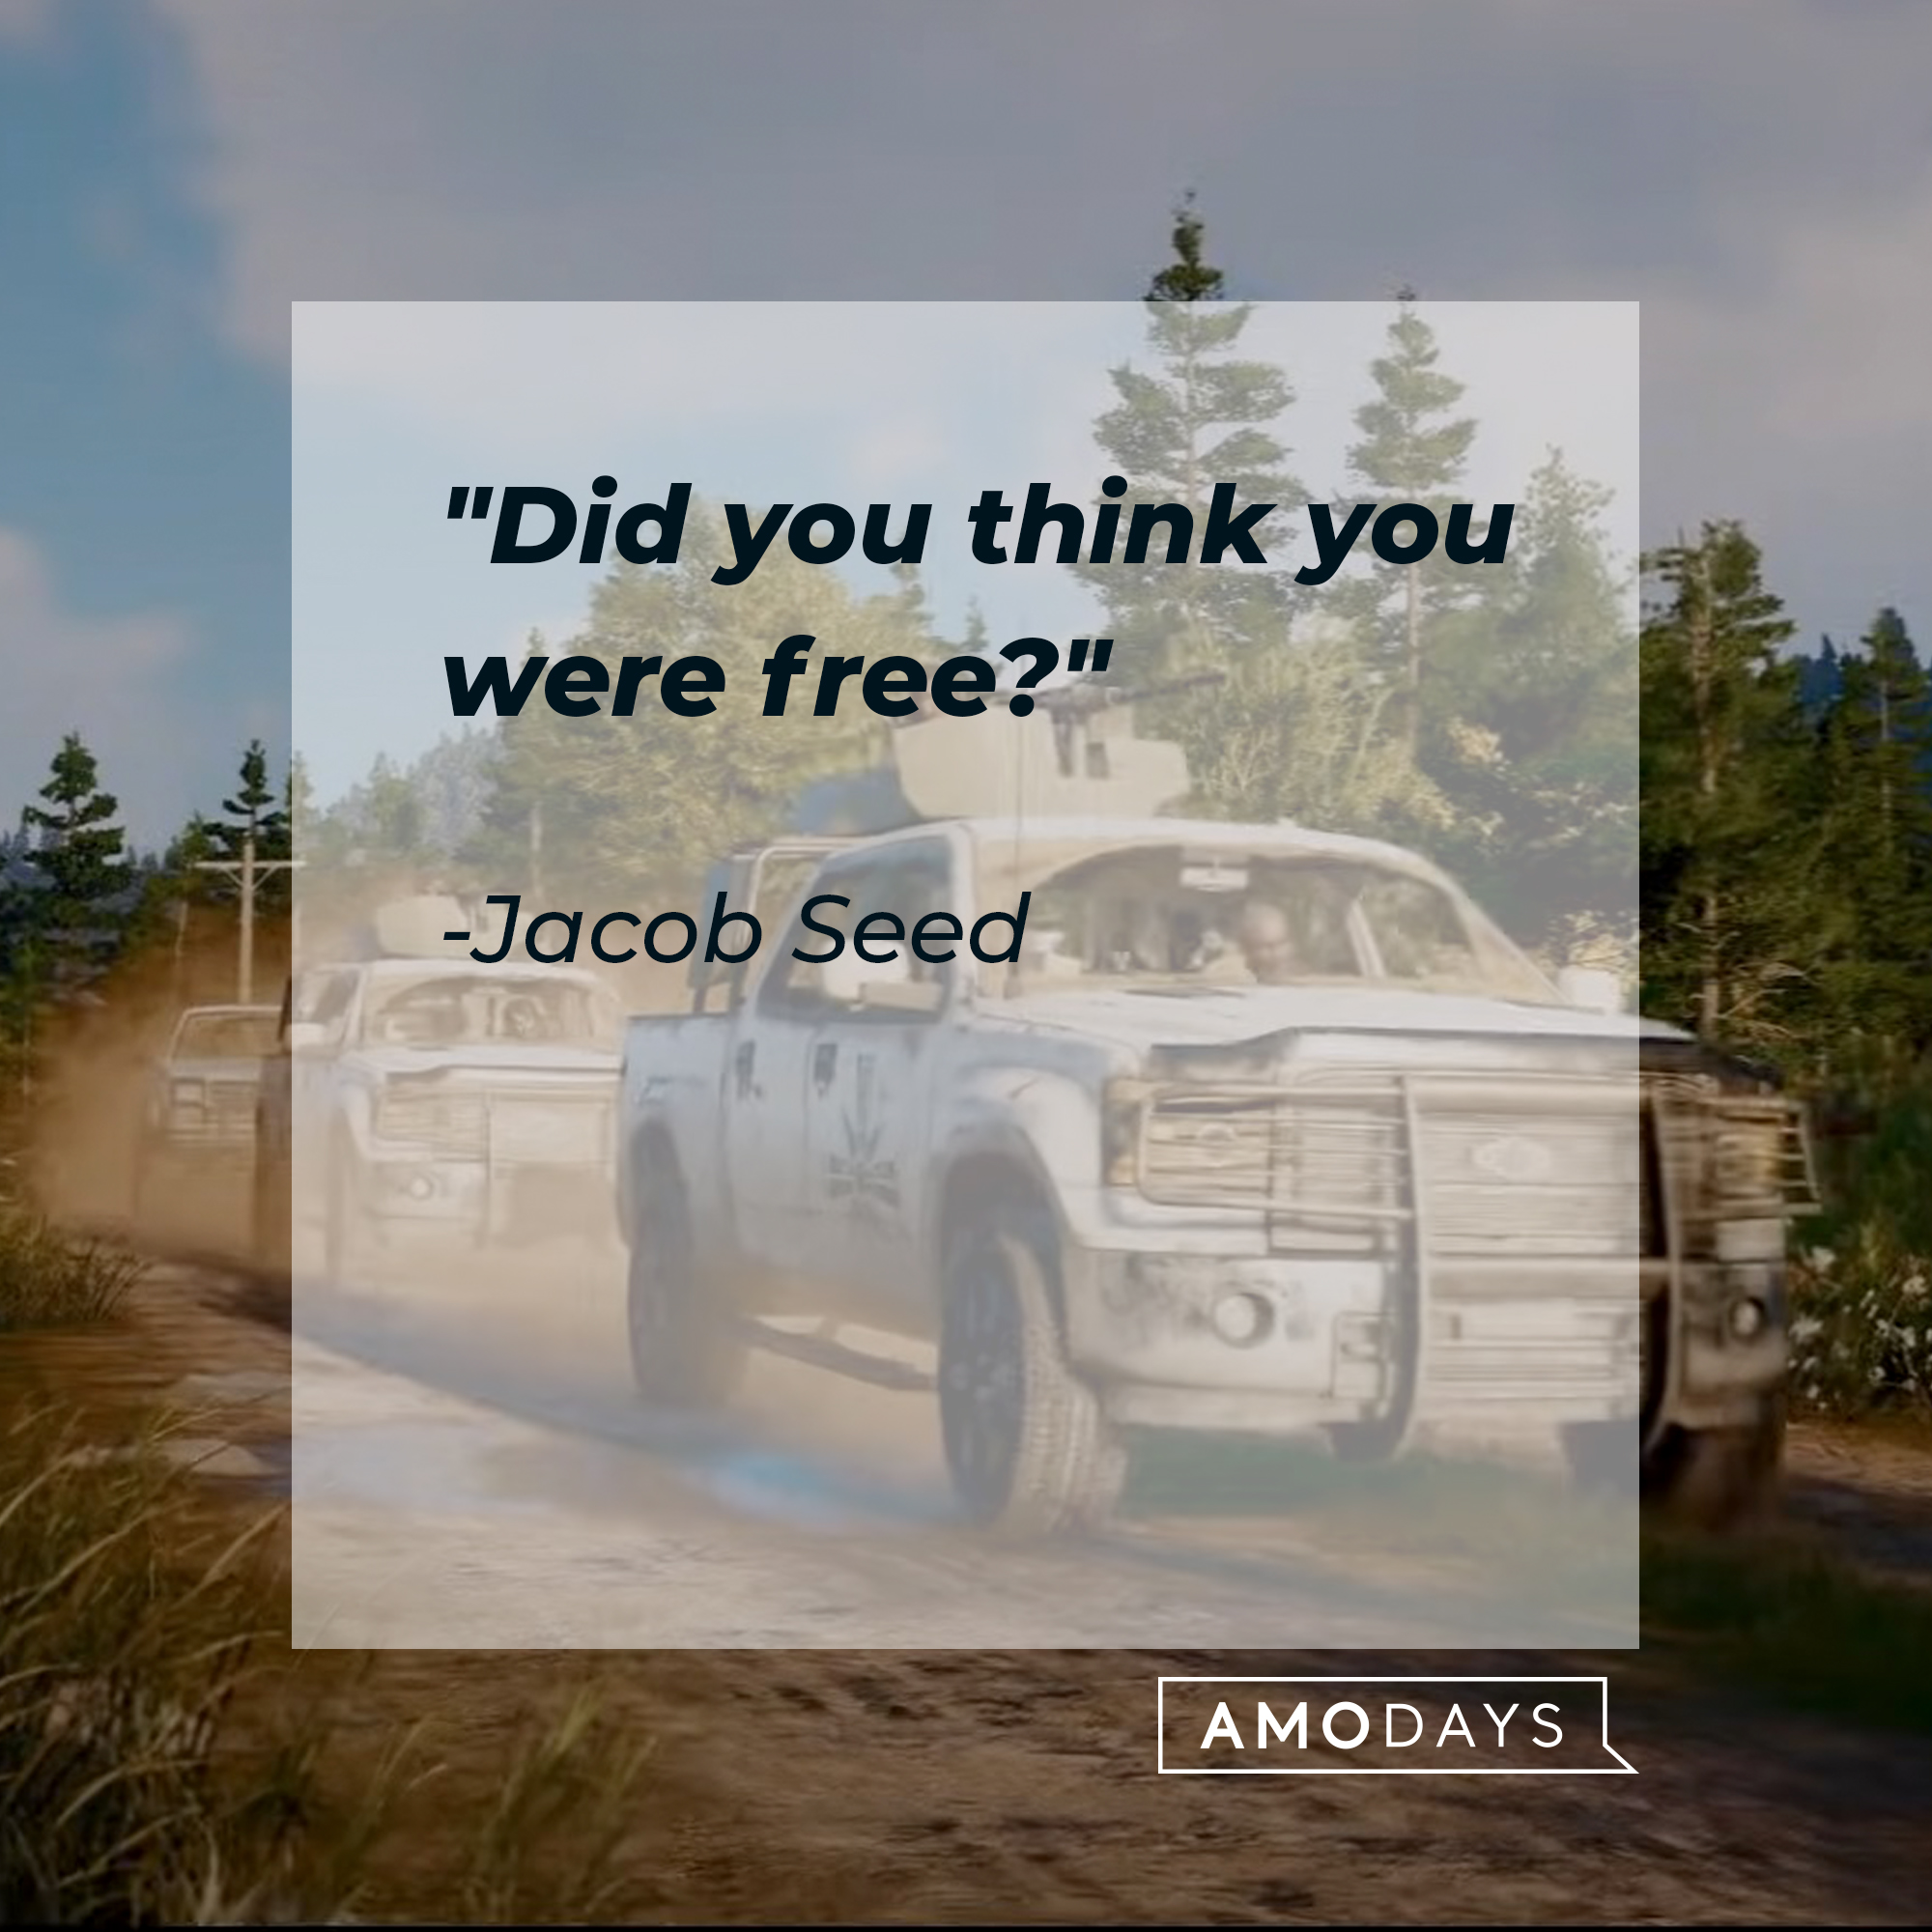 An image of "Far Cry 5" with Jacob Seed's quote: "Did you think you were free?" | Source: youtube.com/Ubisoft North America